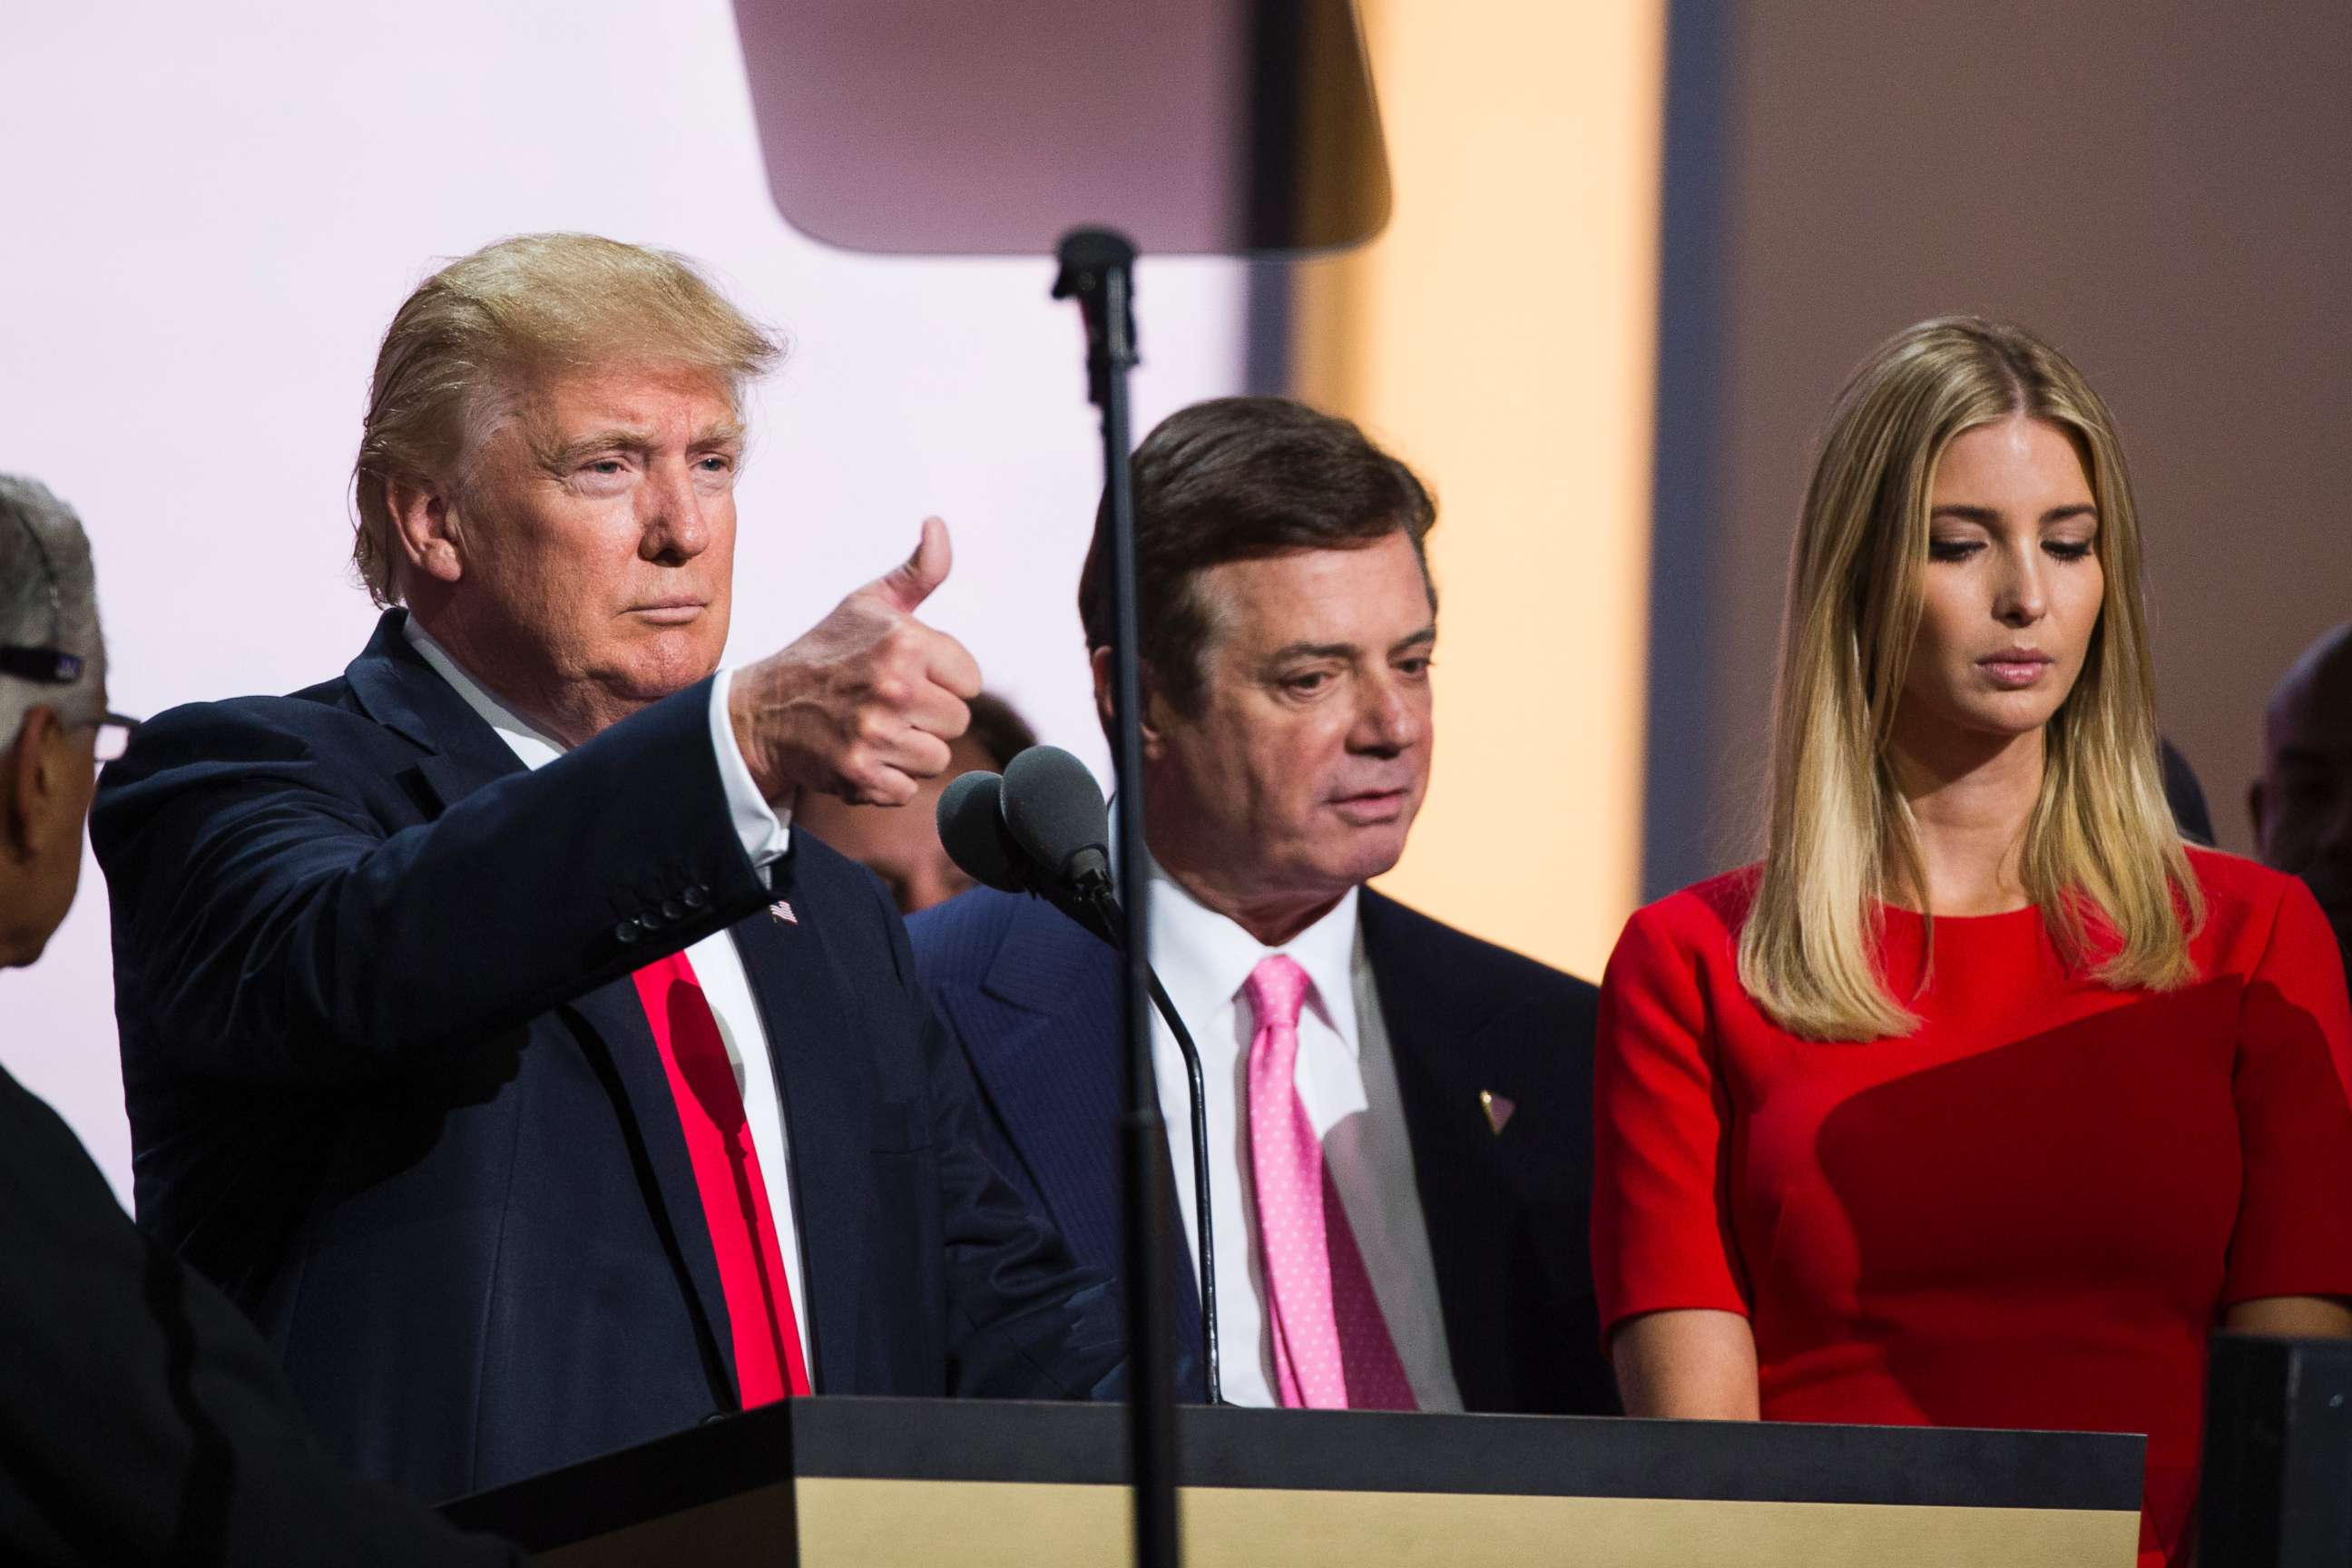 PHOTO: Donald Trump, Campaign Manager Paul Manafort, and his daughter Ivanka Trump do a walk thru at the Republican Convention, July 20, 2016, at the Quicken Loans Arena in Cleveland, Ohio. 